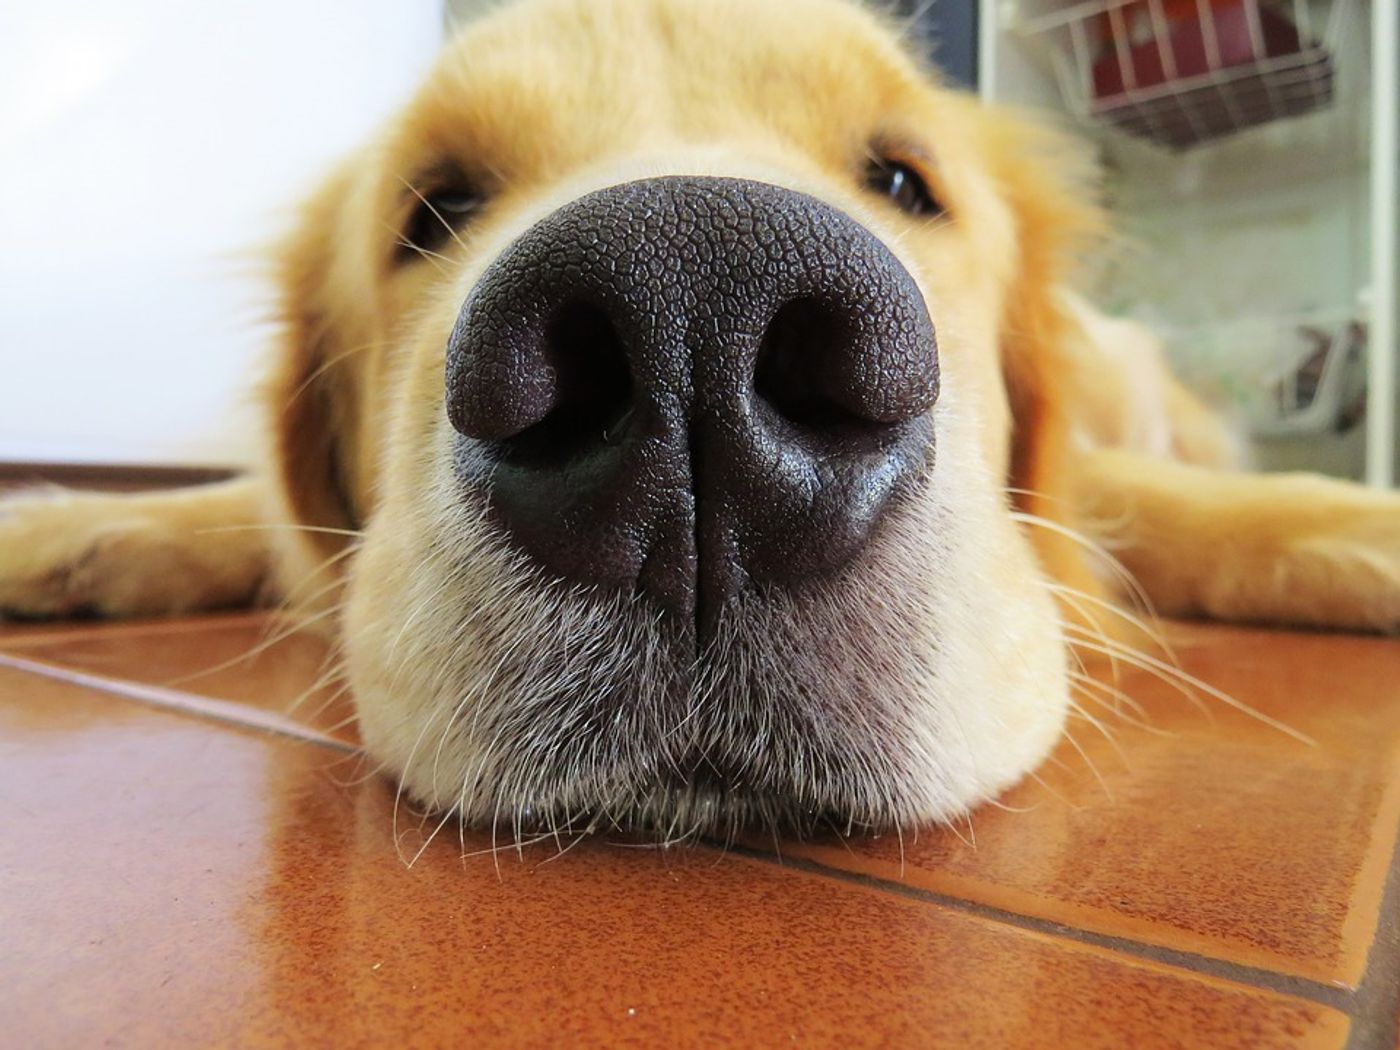 While we have known for some time that dogs' noses are capable of detecting disease, the new eNose is an entirely new concept to precision medicine. Photo: Pixabay